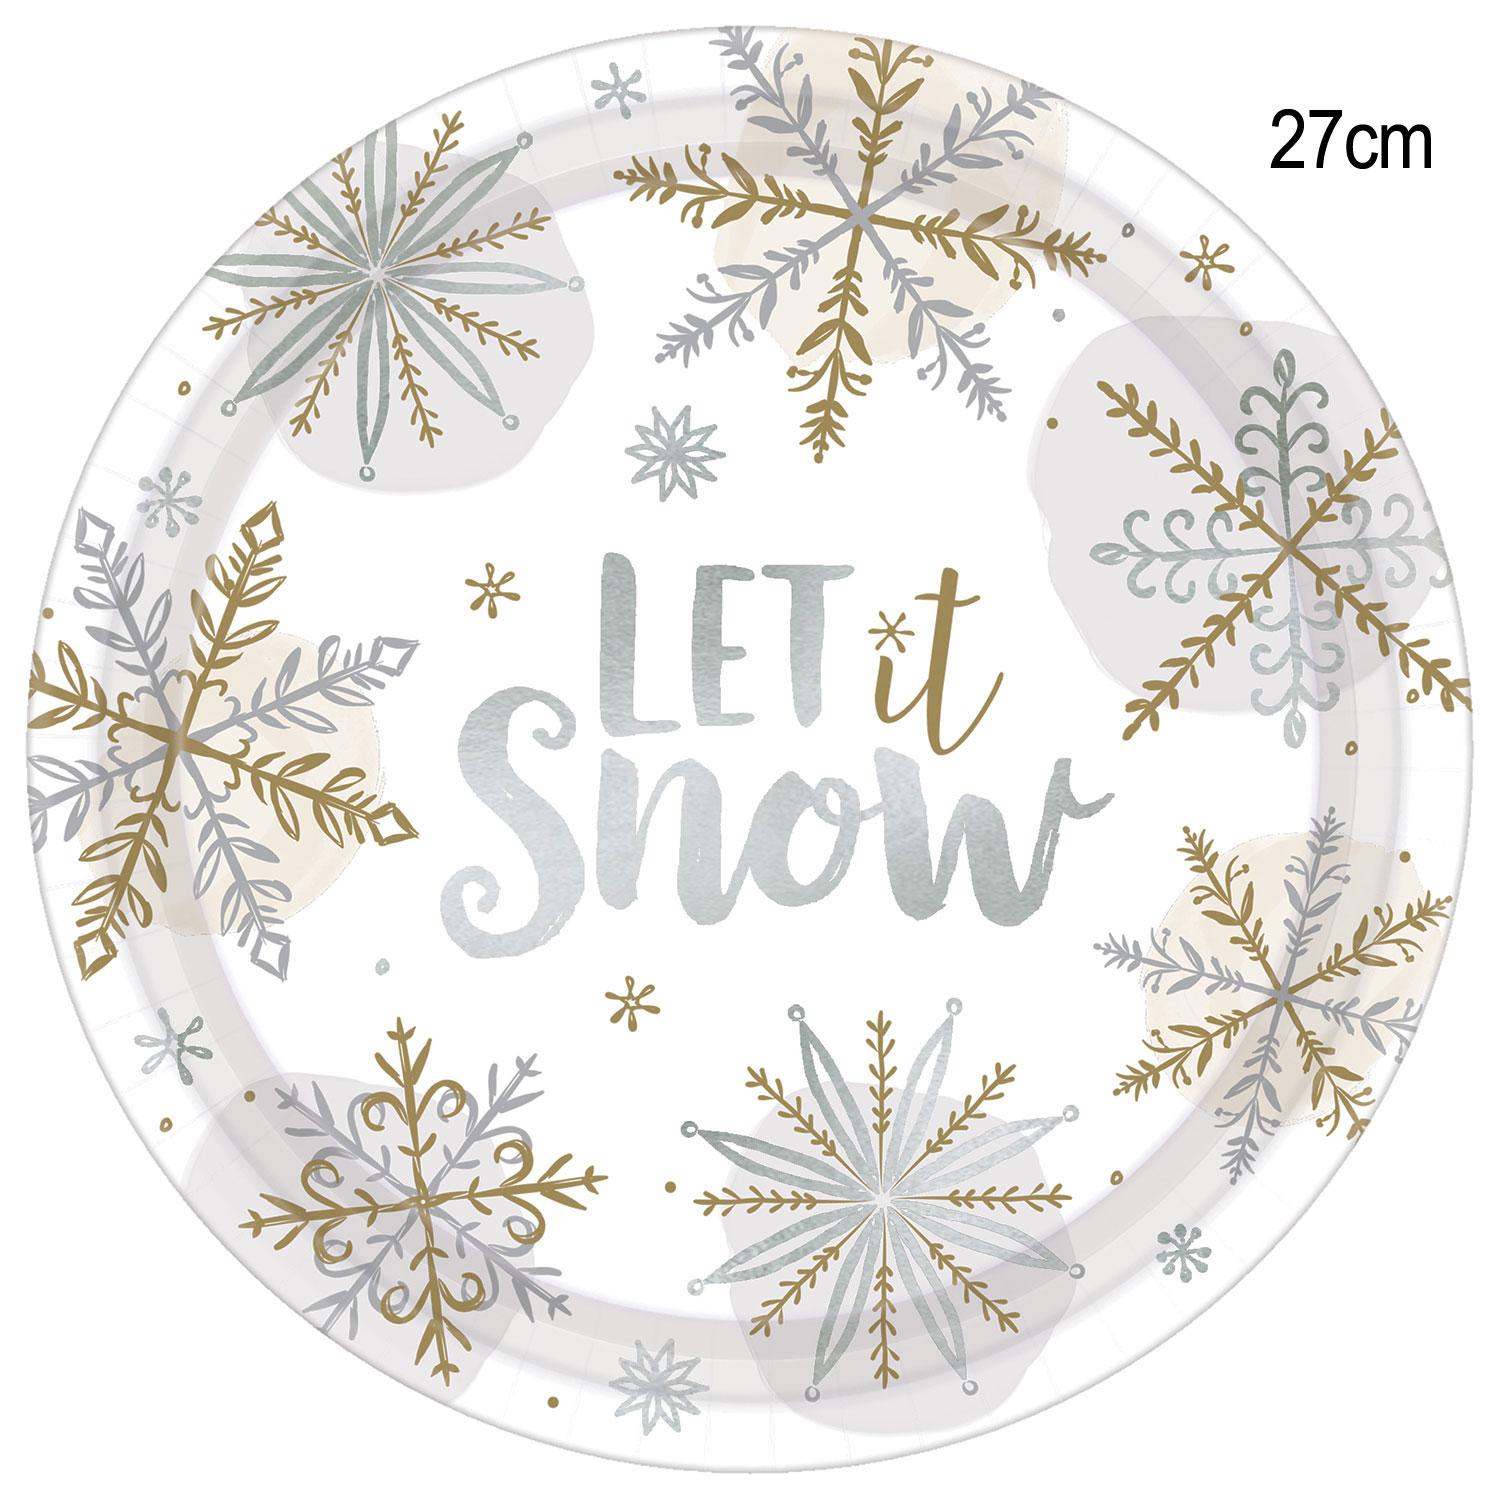 Shining Snow Paper Plates 27cm - pk8 by Amscan 592174 available from a range here at Karnival Costumnes online party shop